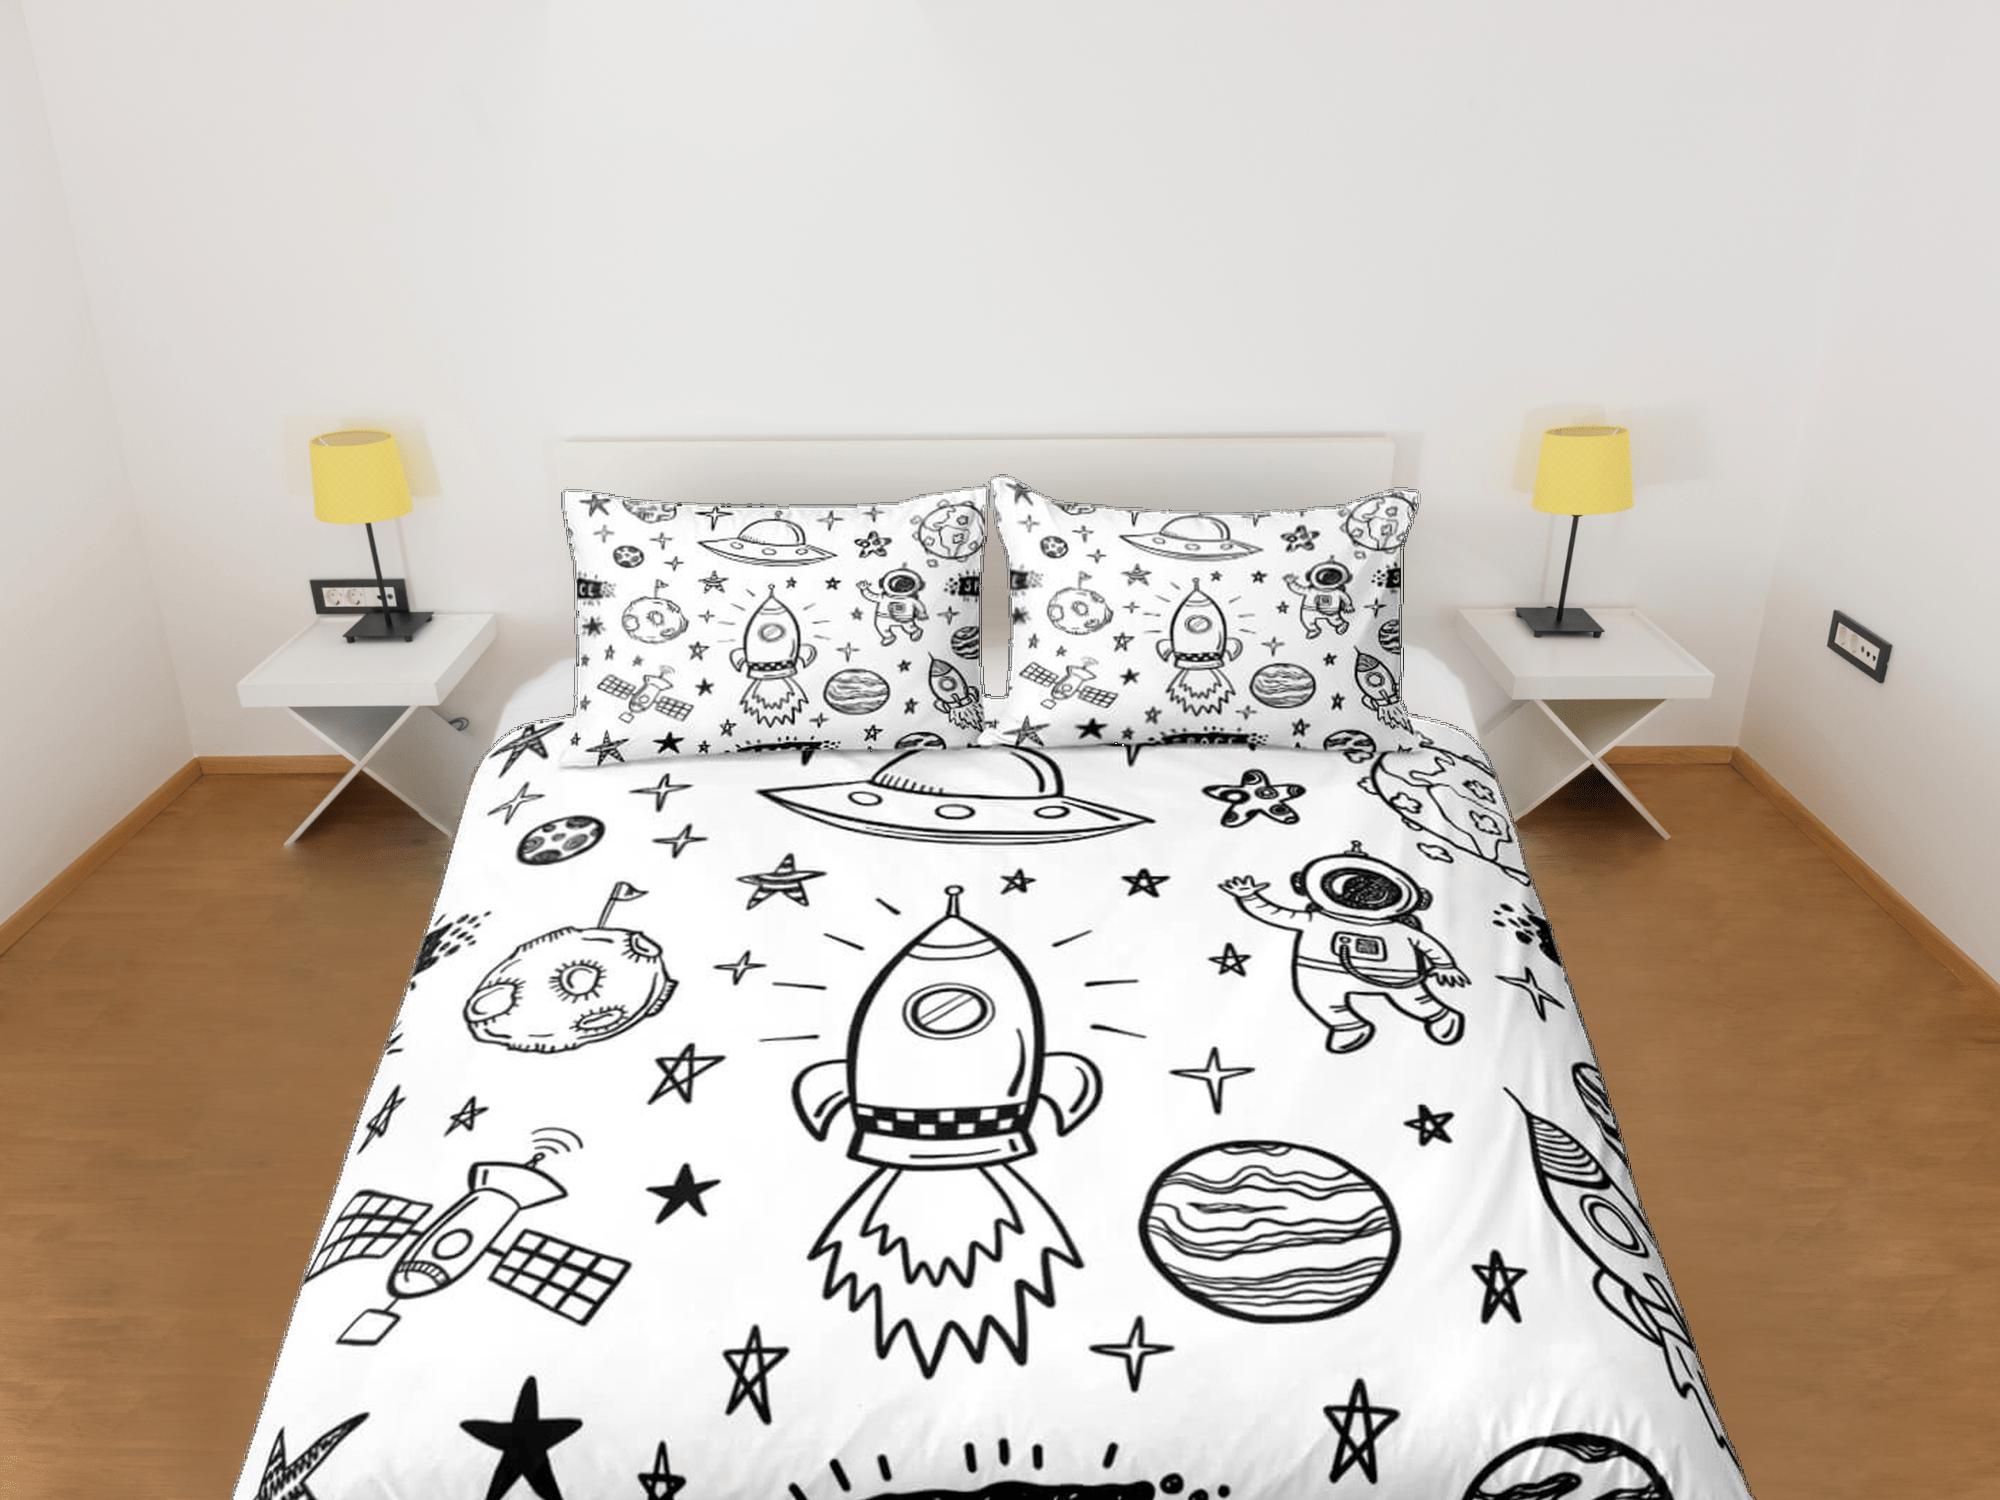 daintyduvet Outer space doodle duvet cover set for kids, galaxy bedding set full, king, queen, astronomy science dorm bedding, toddler bedding aesthetic